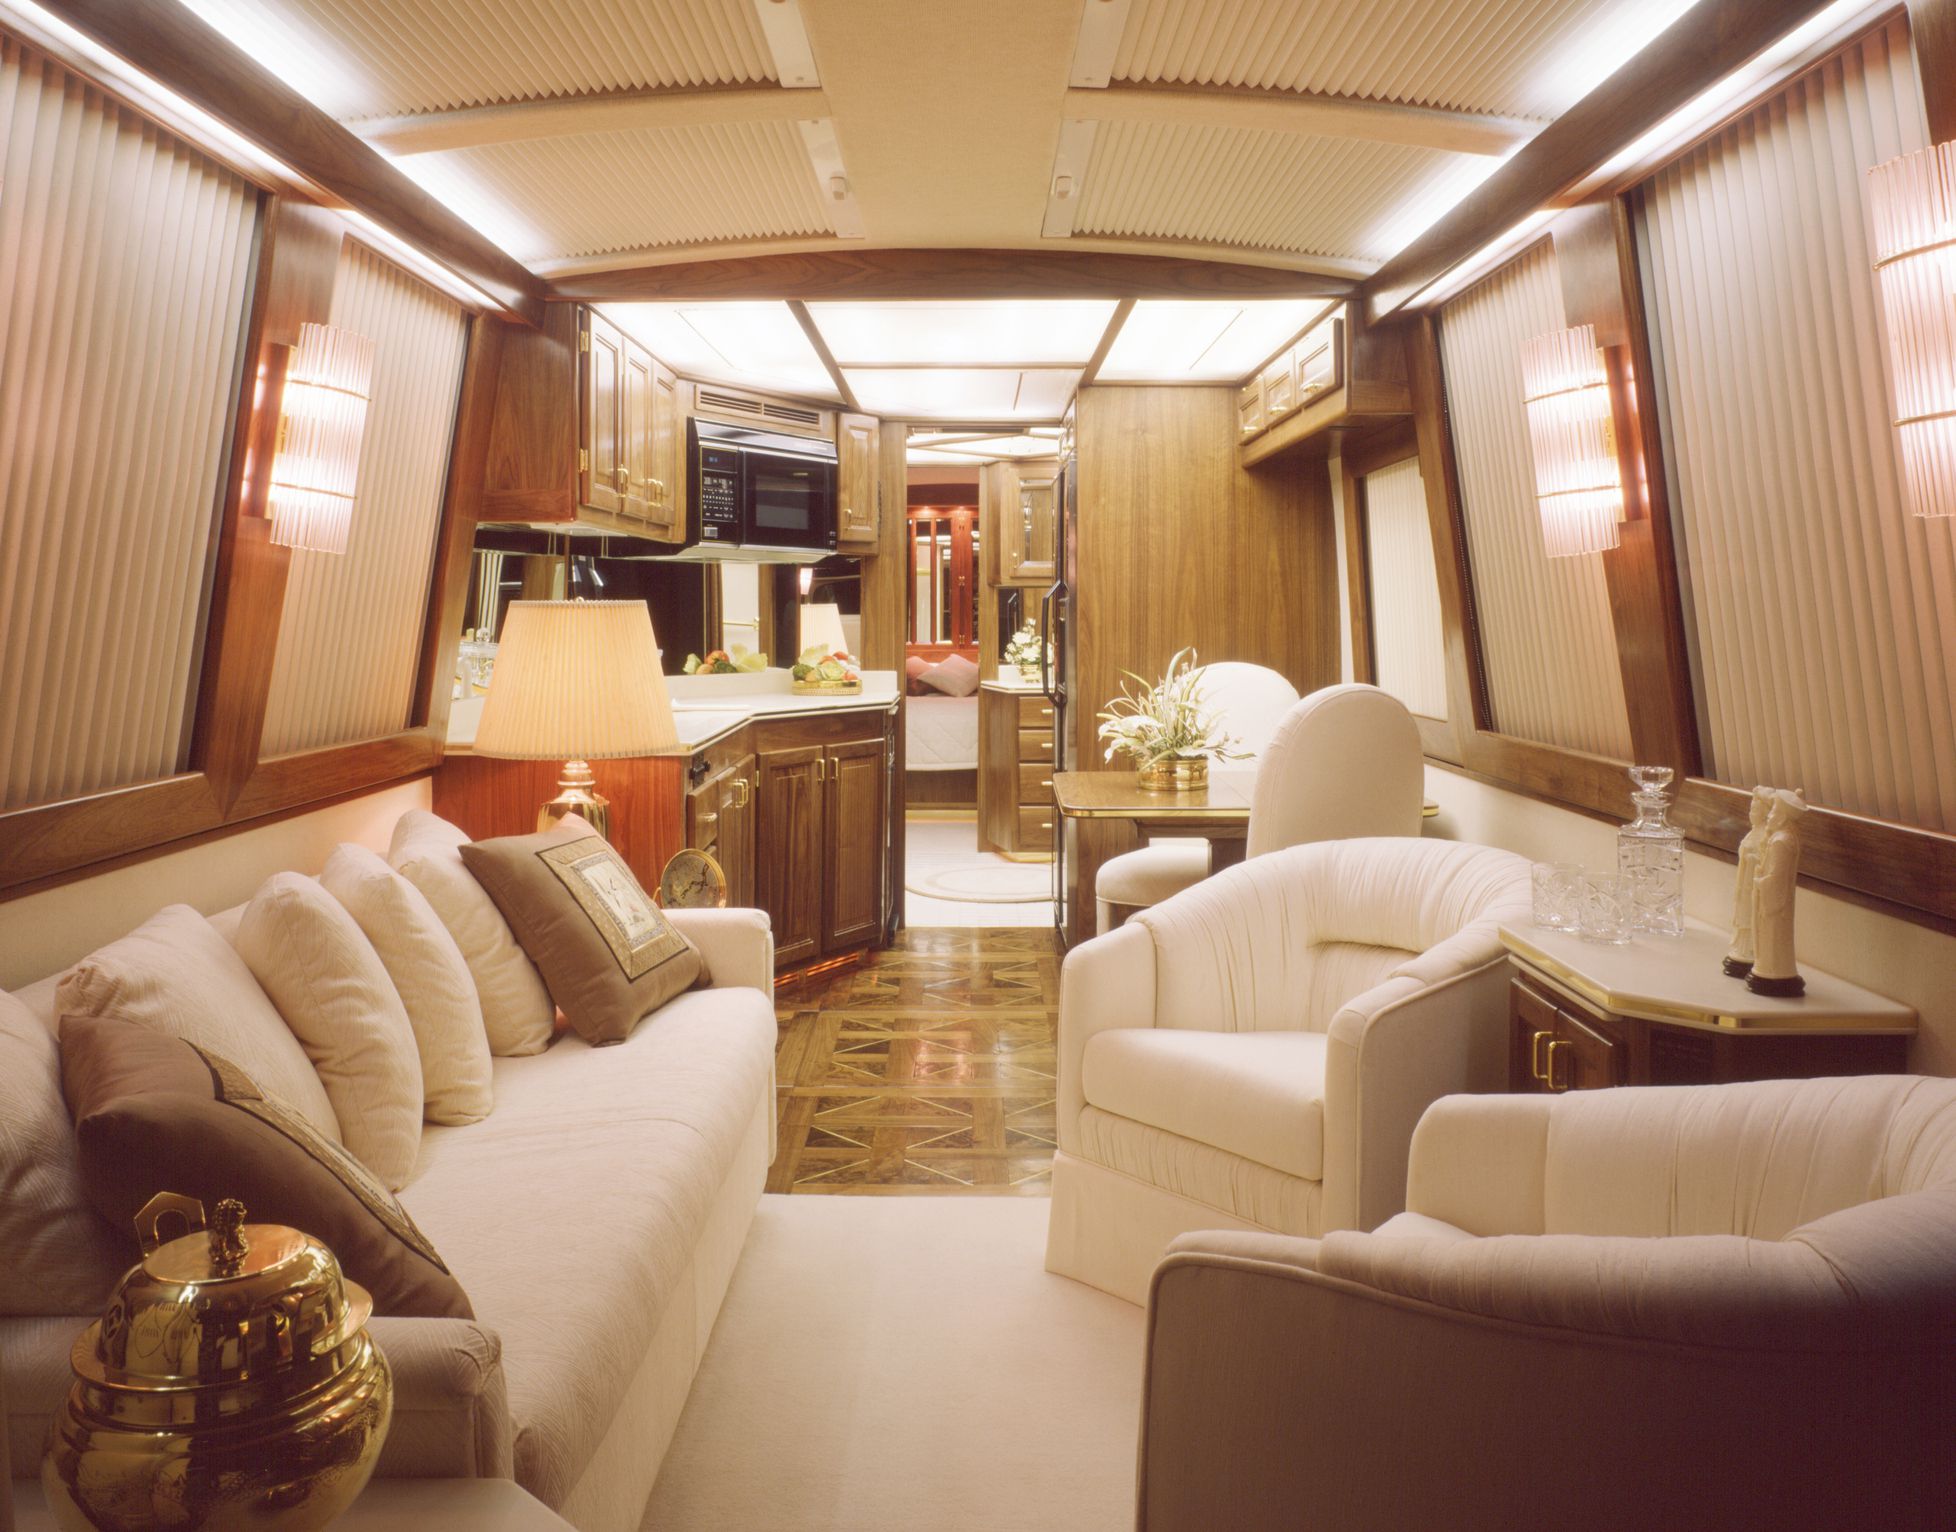 <p>Many people think of motorhomes, travel trailers, and fifth wheels. But did you know there are many more RV types? There are four types of motorhomes, including Class A, Class B, Class C, and the lesser-known and super fancy Super C. Towable RVs include conventional travel trailers, toy haulers (designed for transporting ATVs, motorcycles, and the like), travel trailers with expandable ends, folding or pop-up trailers, and fifth wheels. Then there are park model RVs and, becoming more common, towable tiny homes often built by their owners. You also can’t forget about truck top campers.</p>